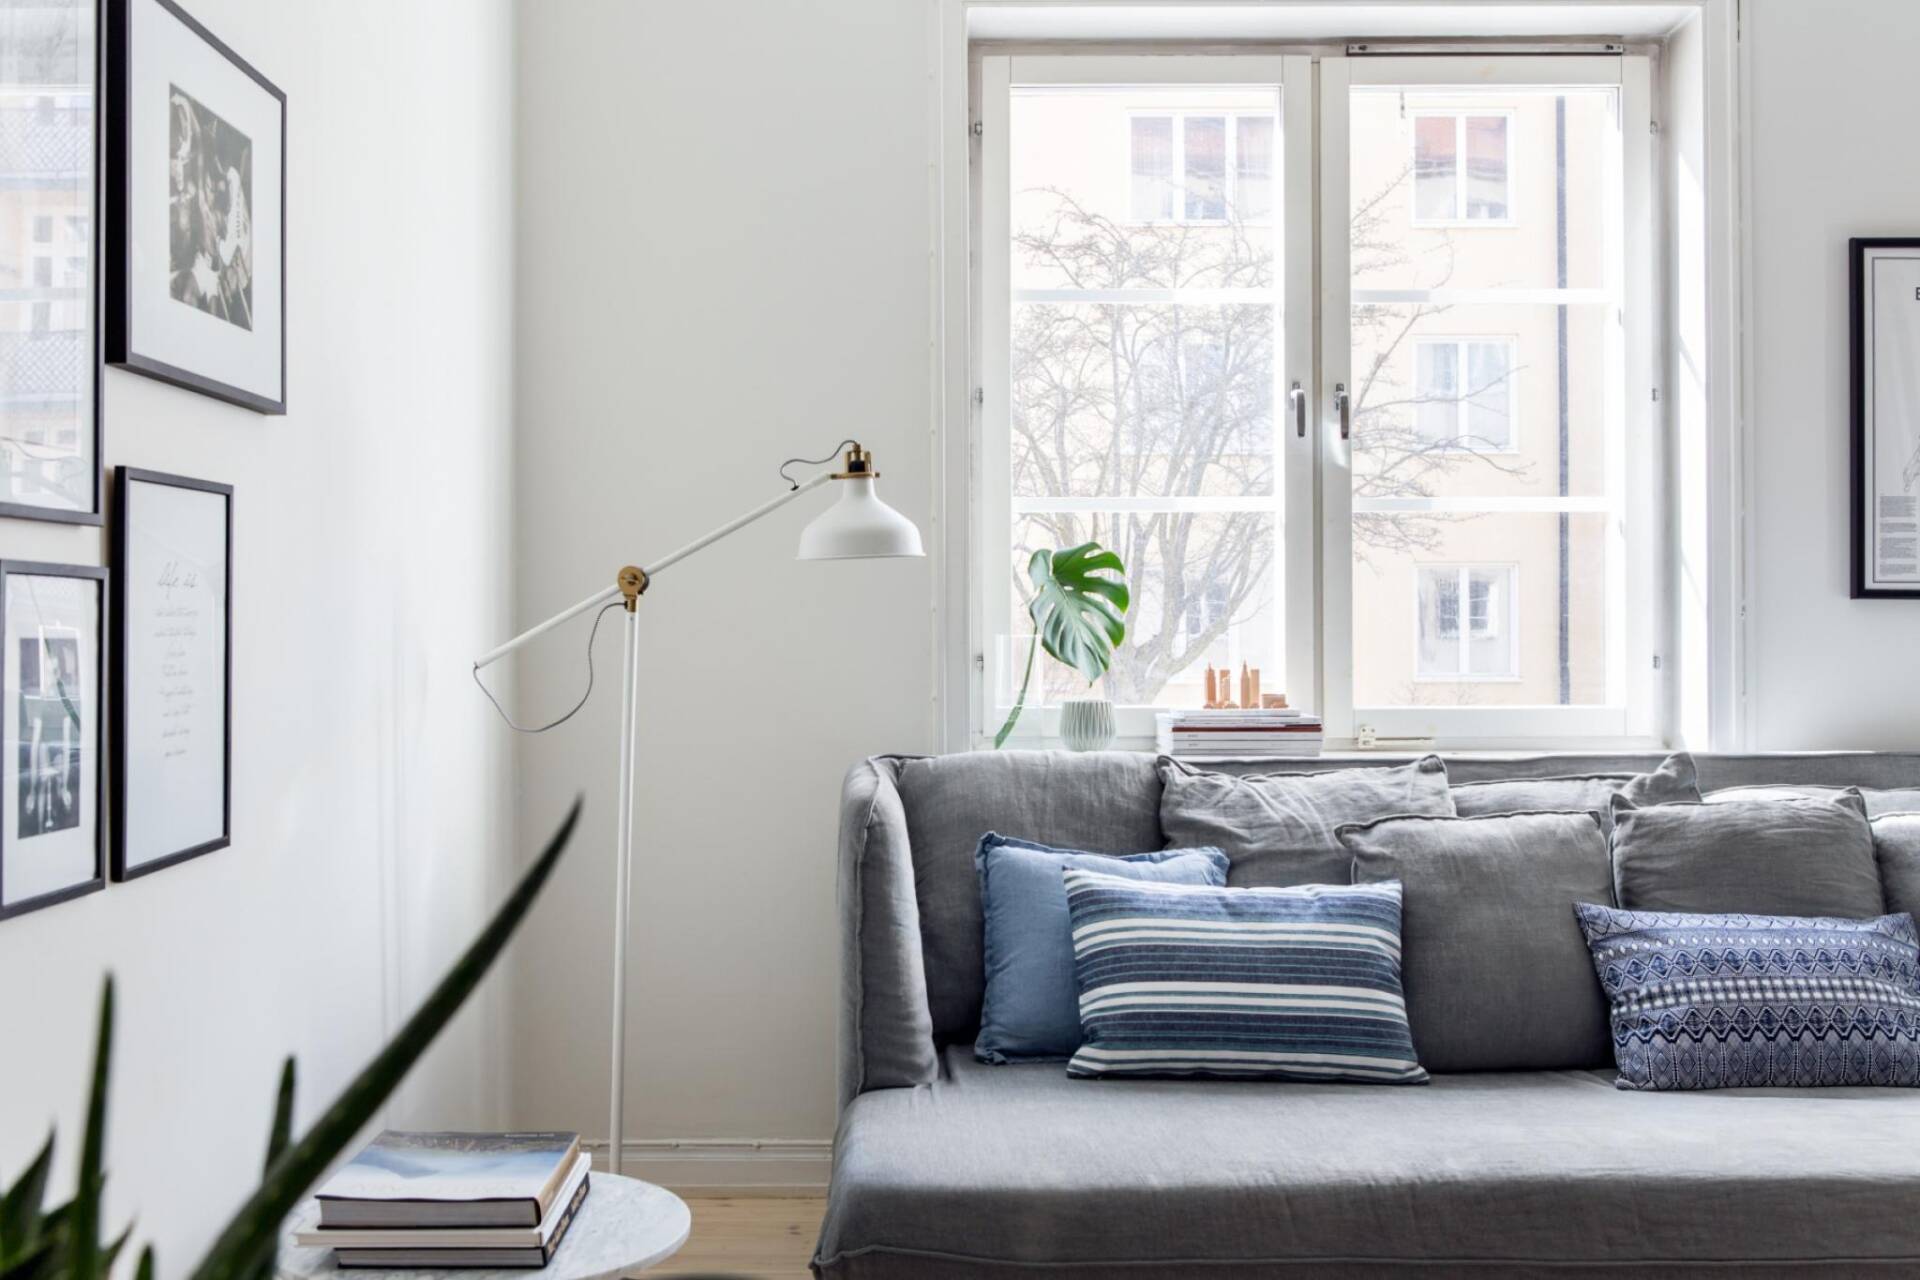 Decorating a living room in Nordic style is not very complicate, you can completely come up with your own ideas